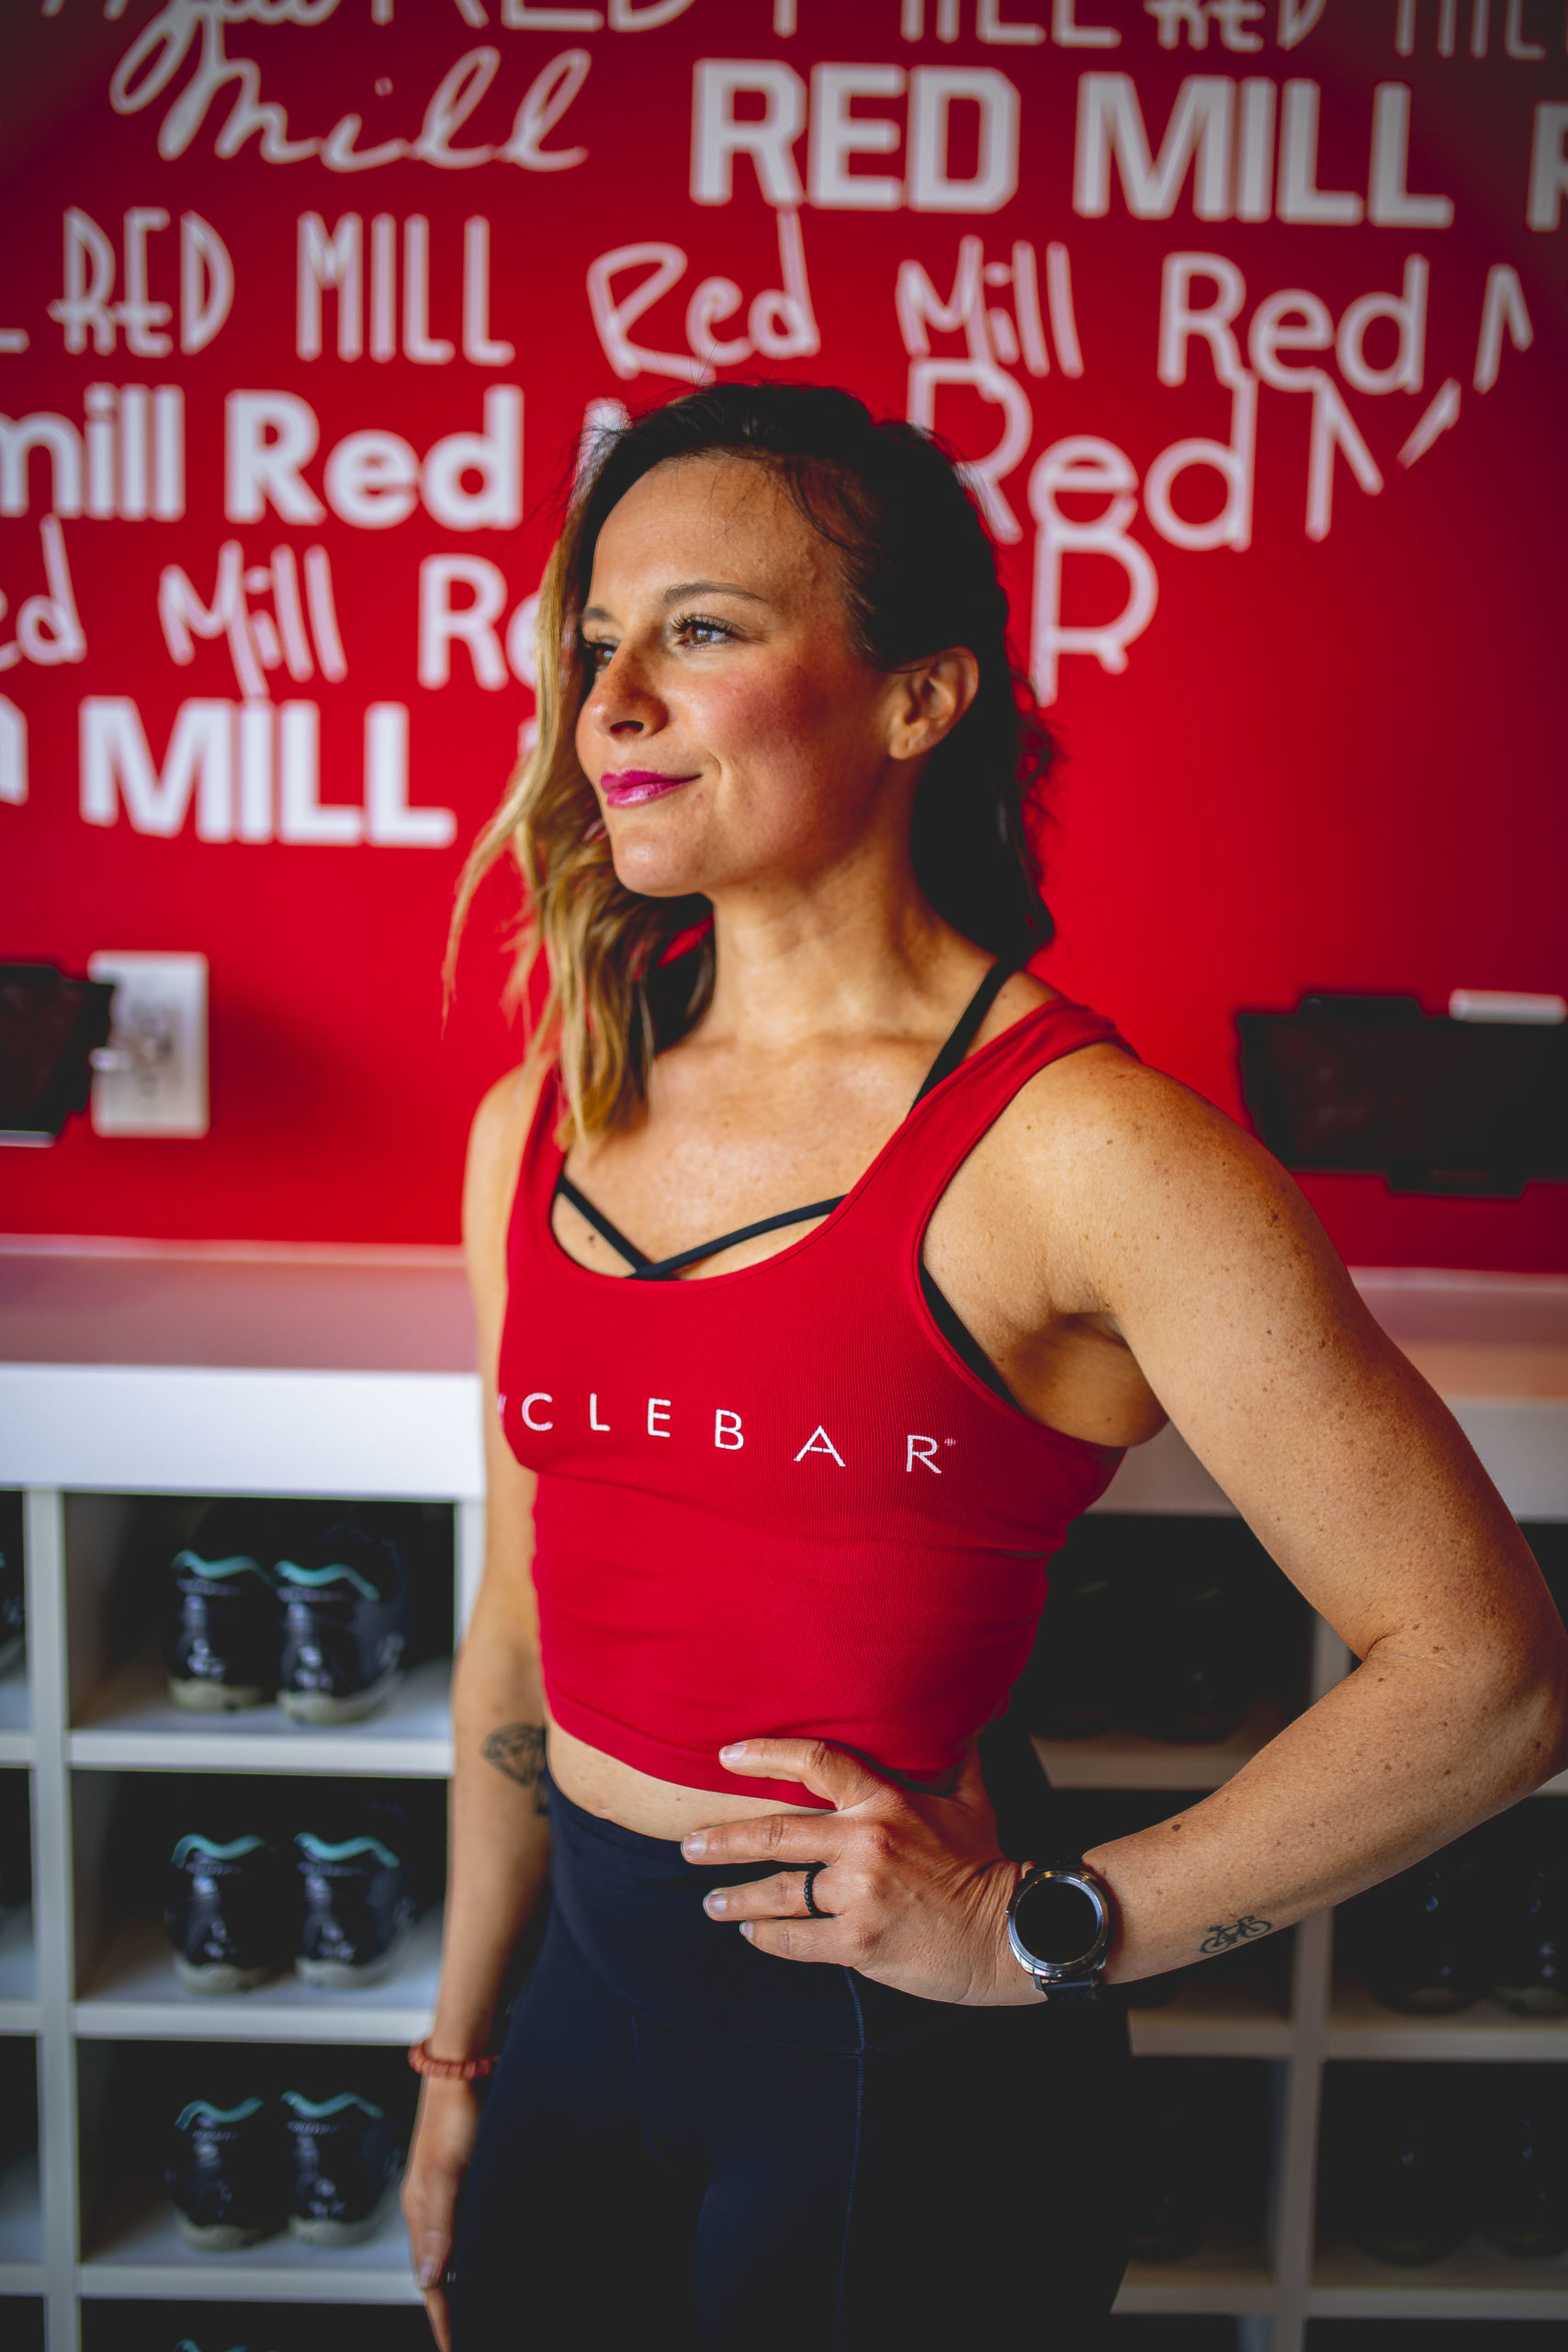 CycleBar Redmill, misty saves the day, live streaming, virginia beach fitness studio, content photography